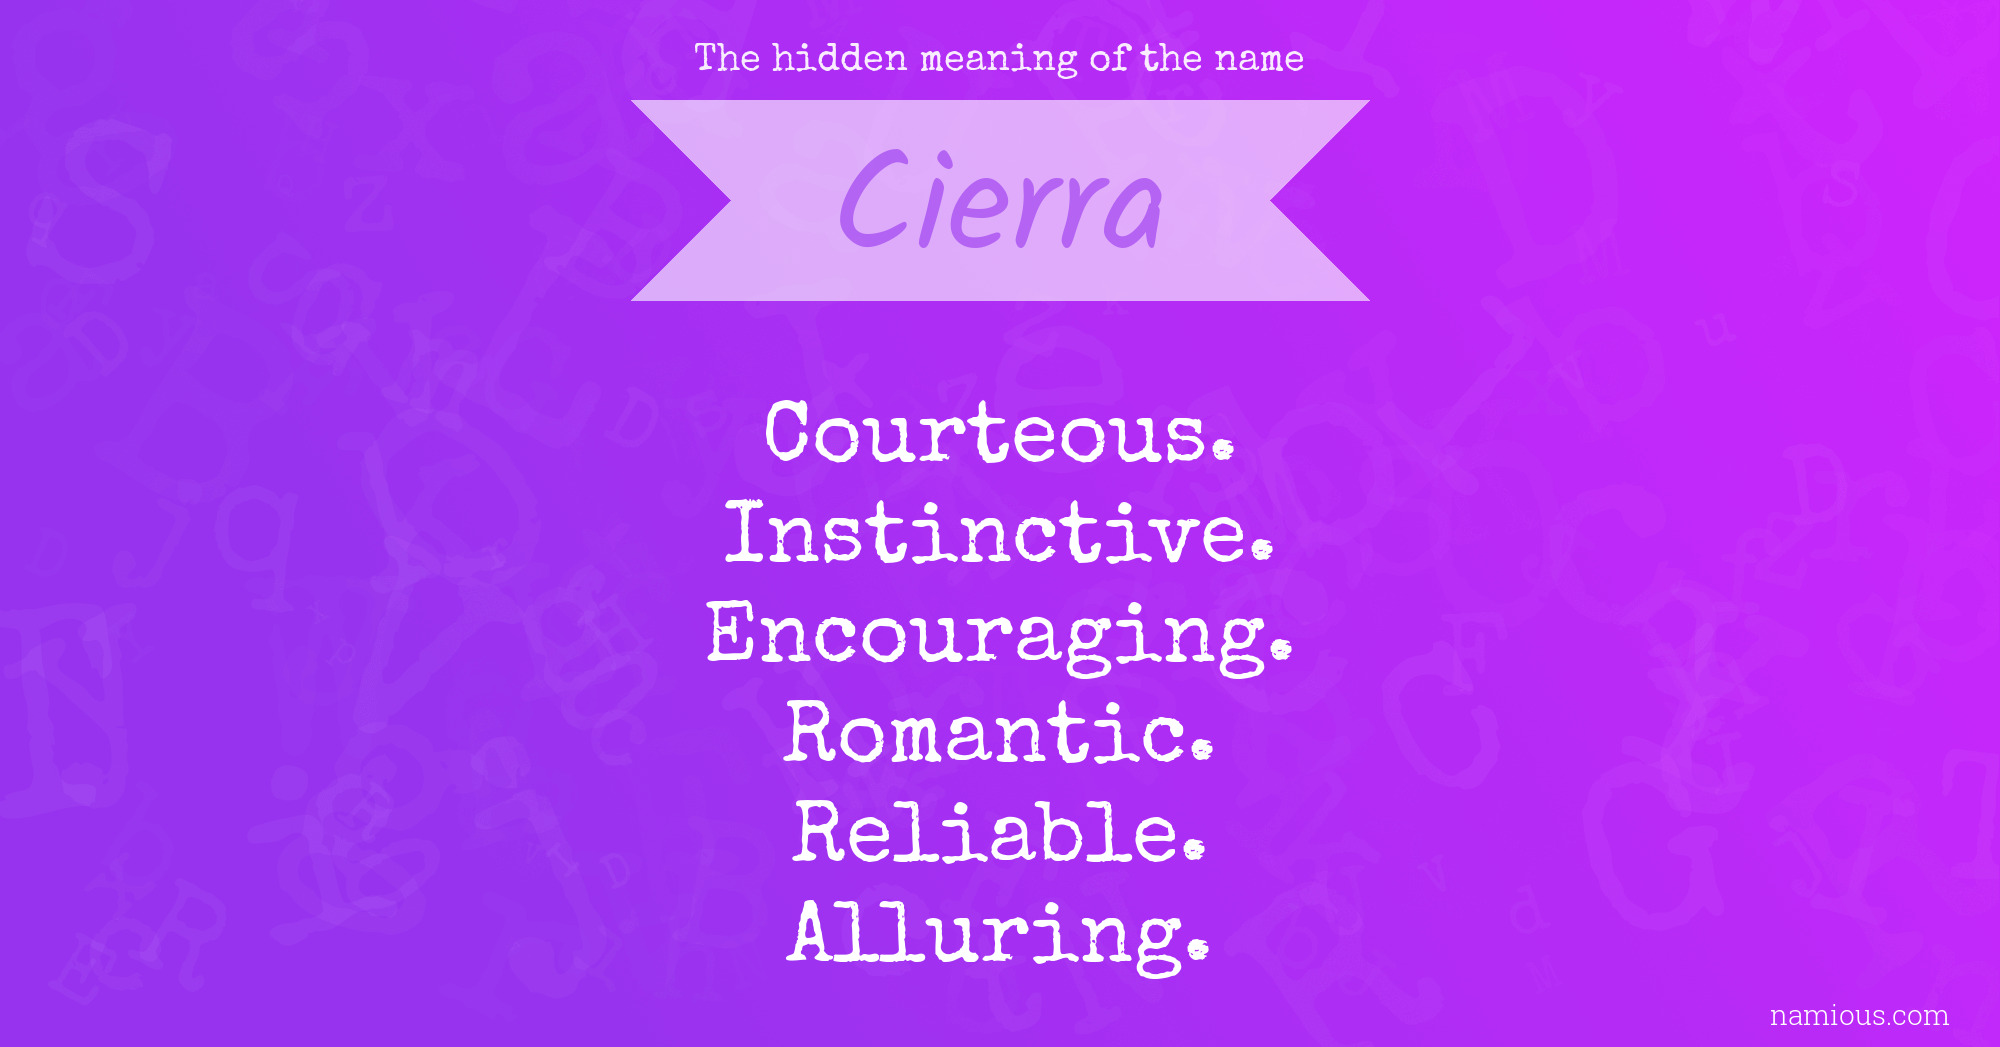 The hidden meaning of the name Cierra